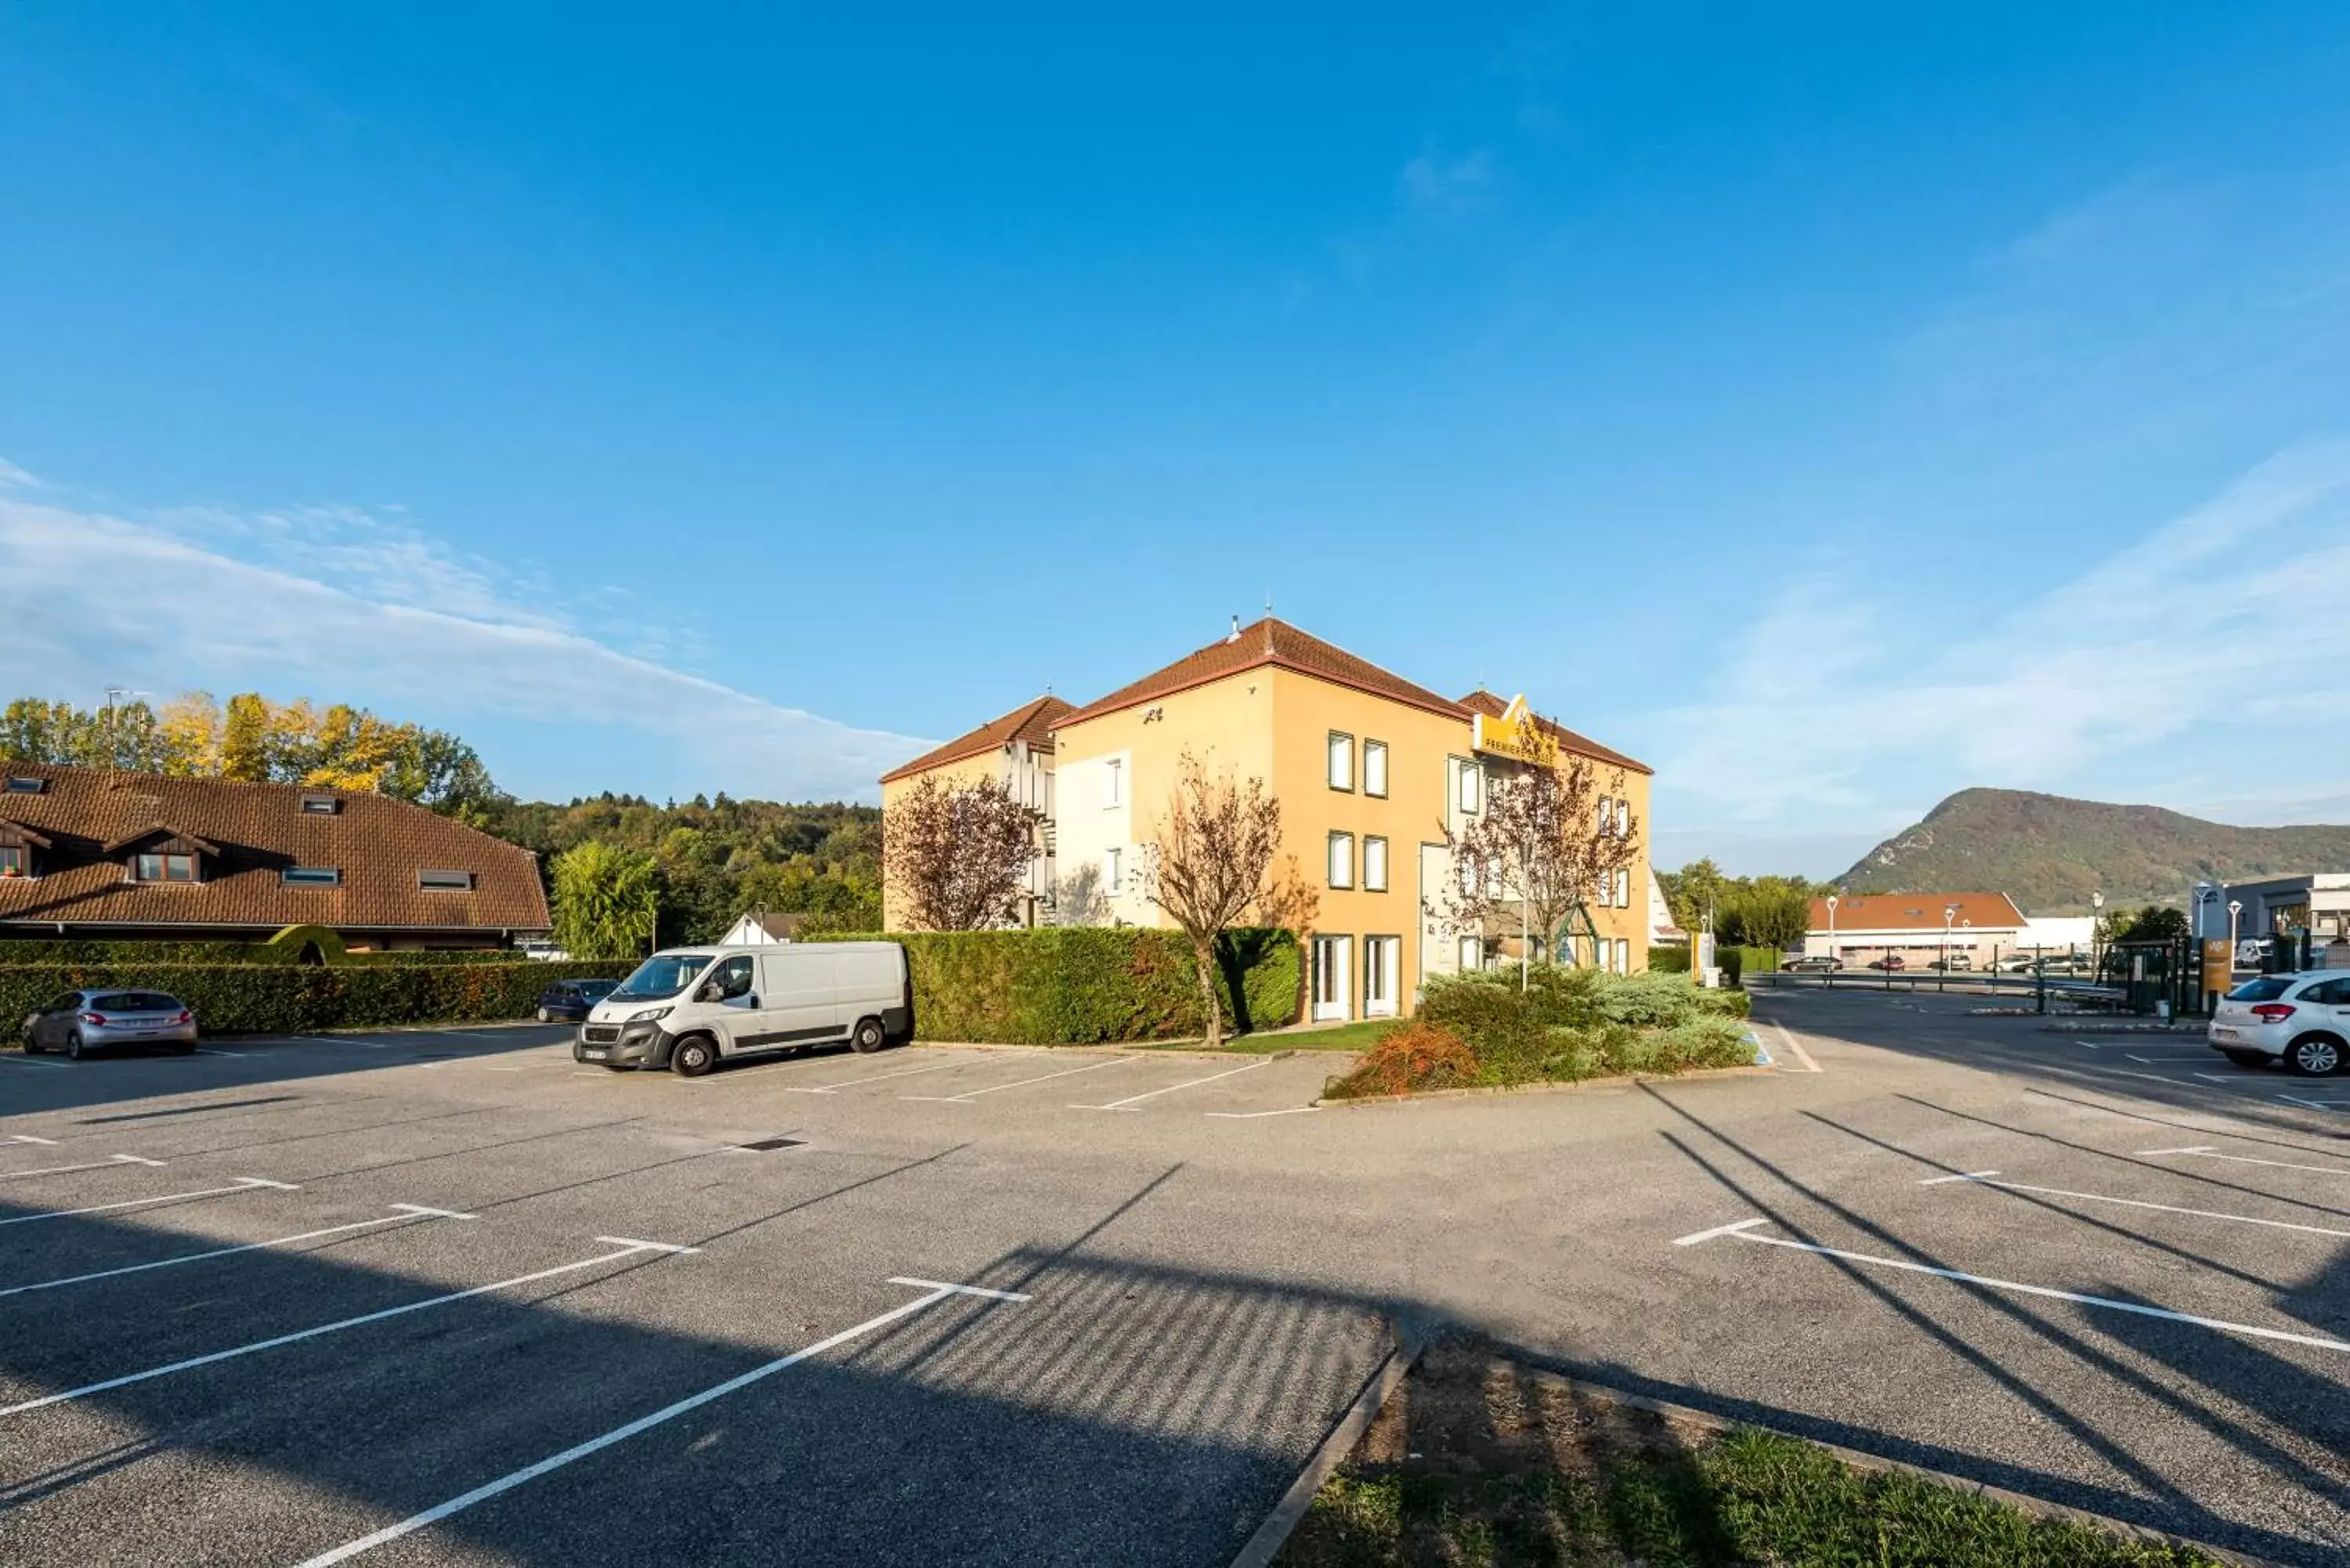 Property Building in Premiere Classe Annecy Nord - Epagny